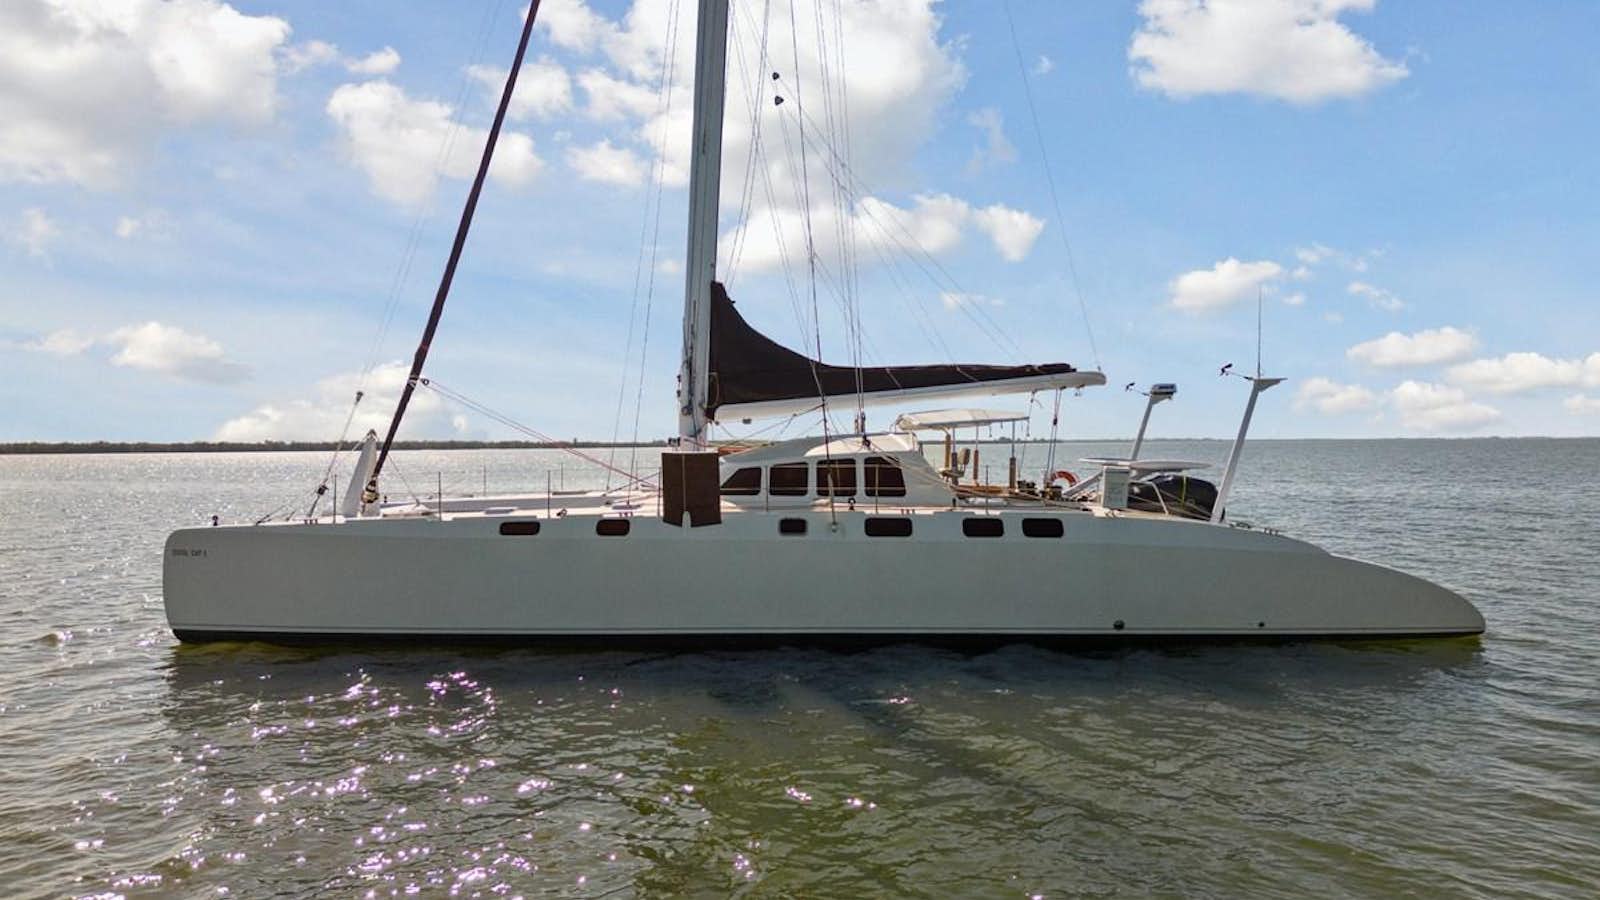 Cool cat
Yacht for Sale